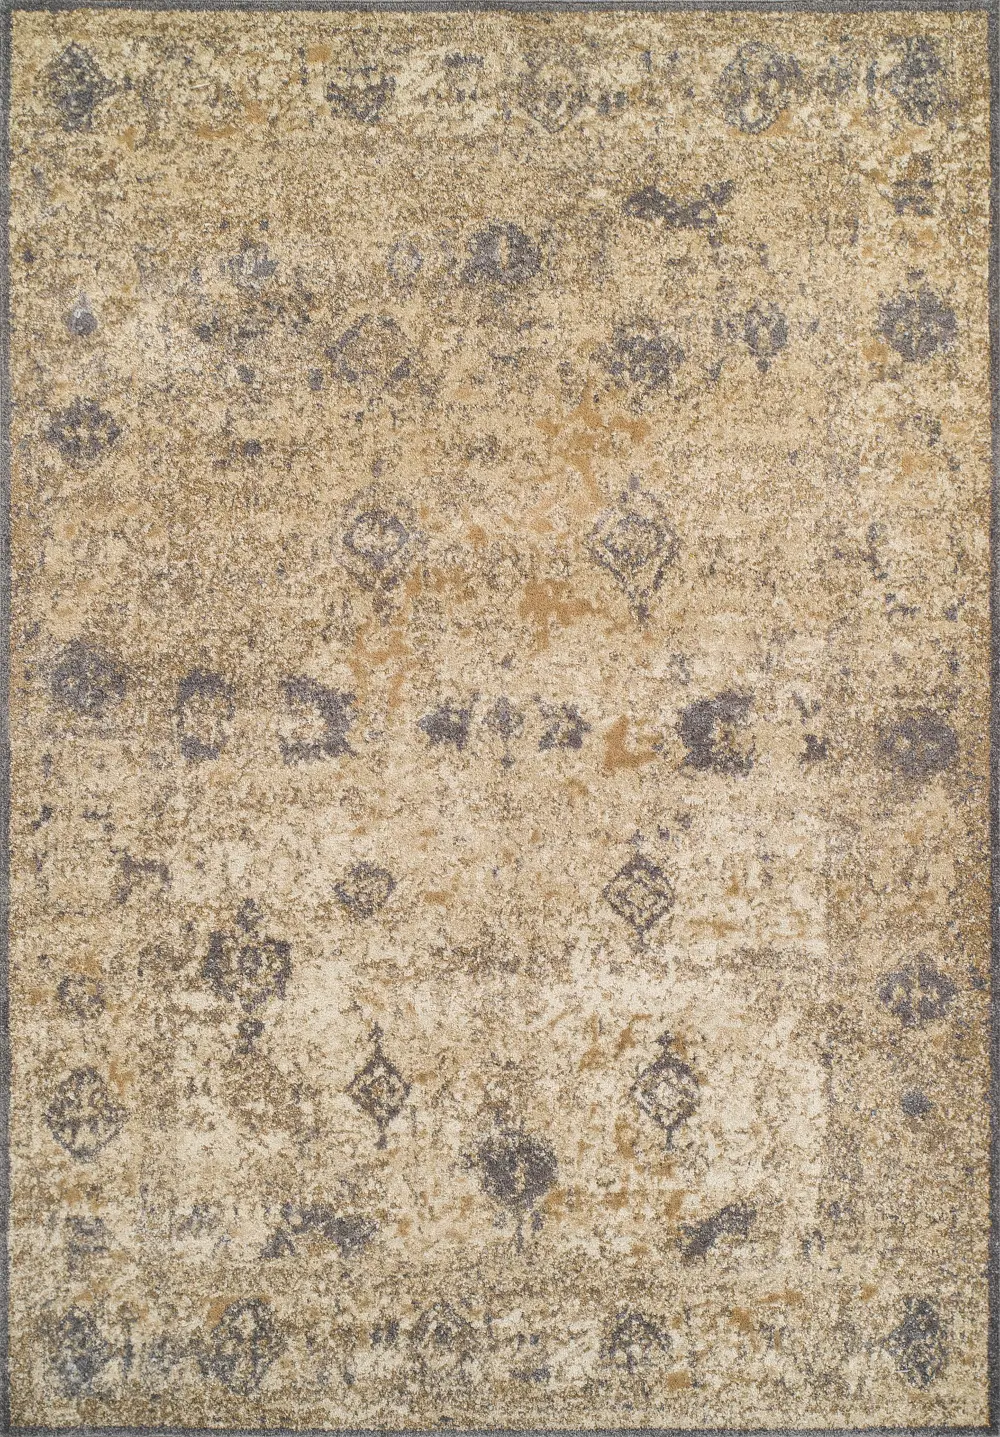 AQ1GR3X5 3 x 5 Small Ivory and Gray Area Rug - Antiquity-1